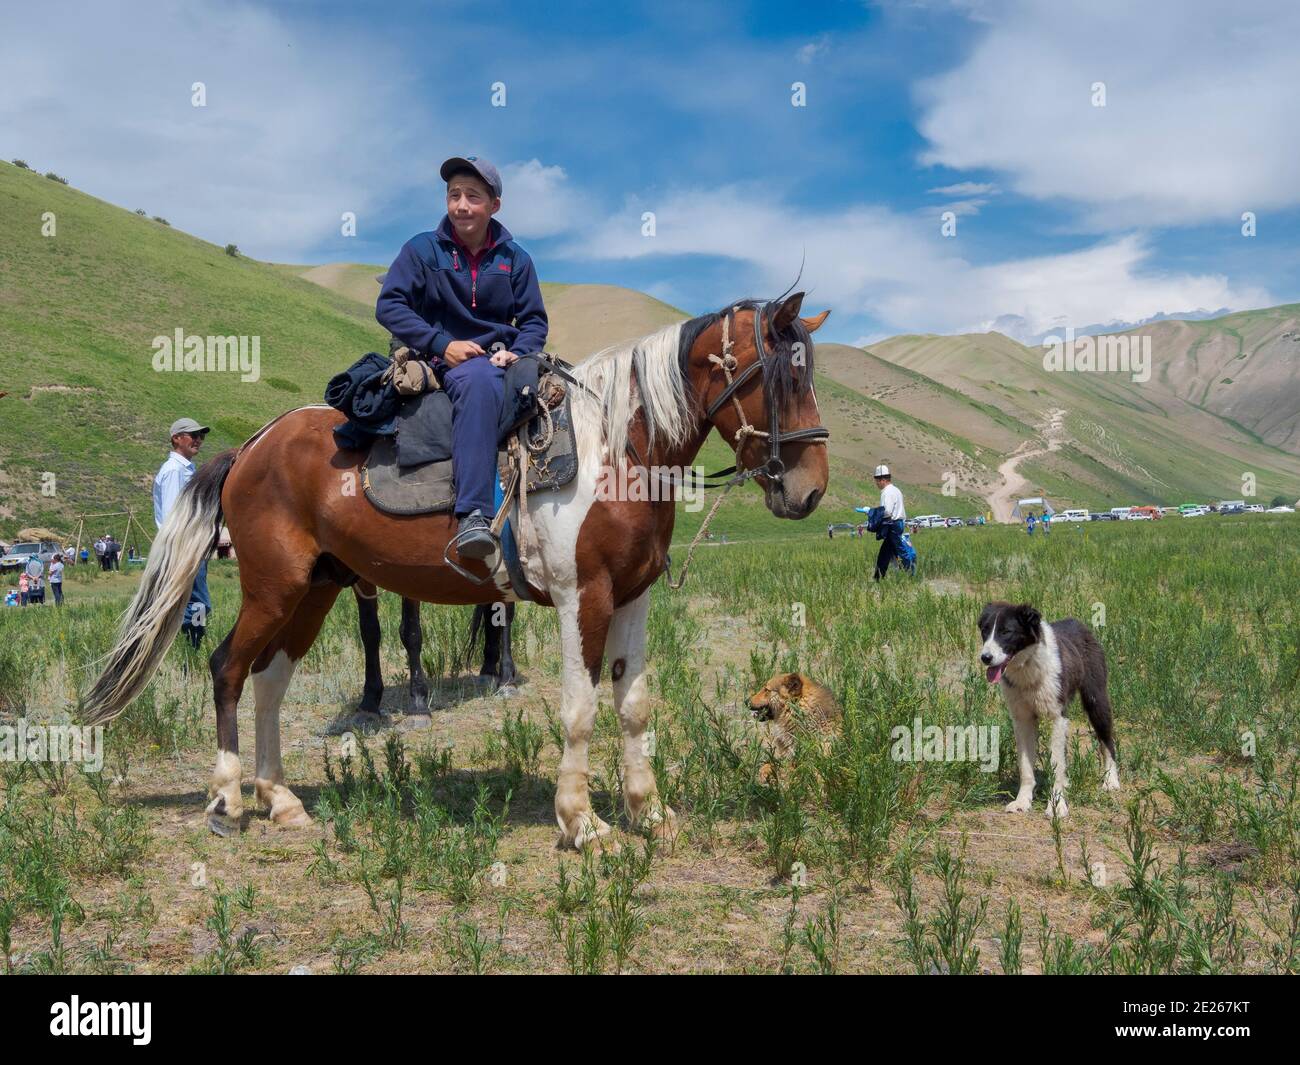 Hunting dog before the competition. Folk Festival commemorating the origin myth the Tien Shan Maral (Tian Shan wapiti), an origin myth of the Kyrgyz t Stock Photo